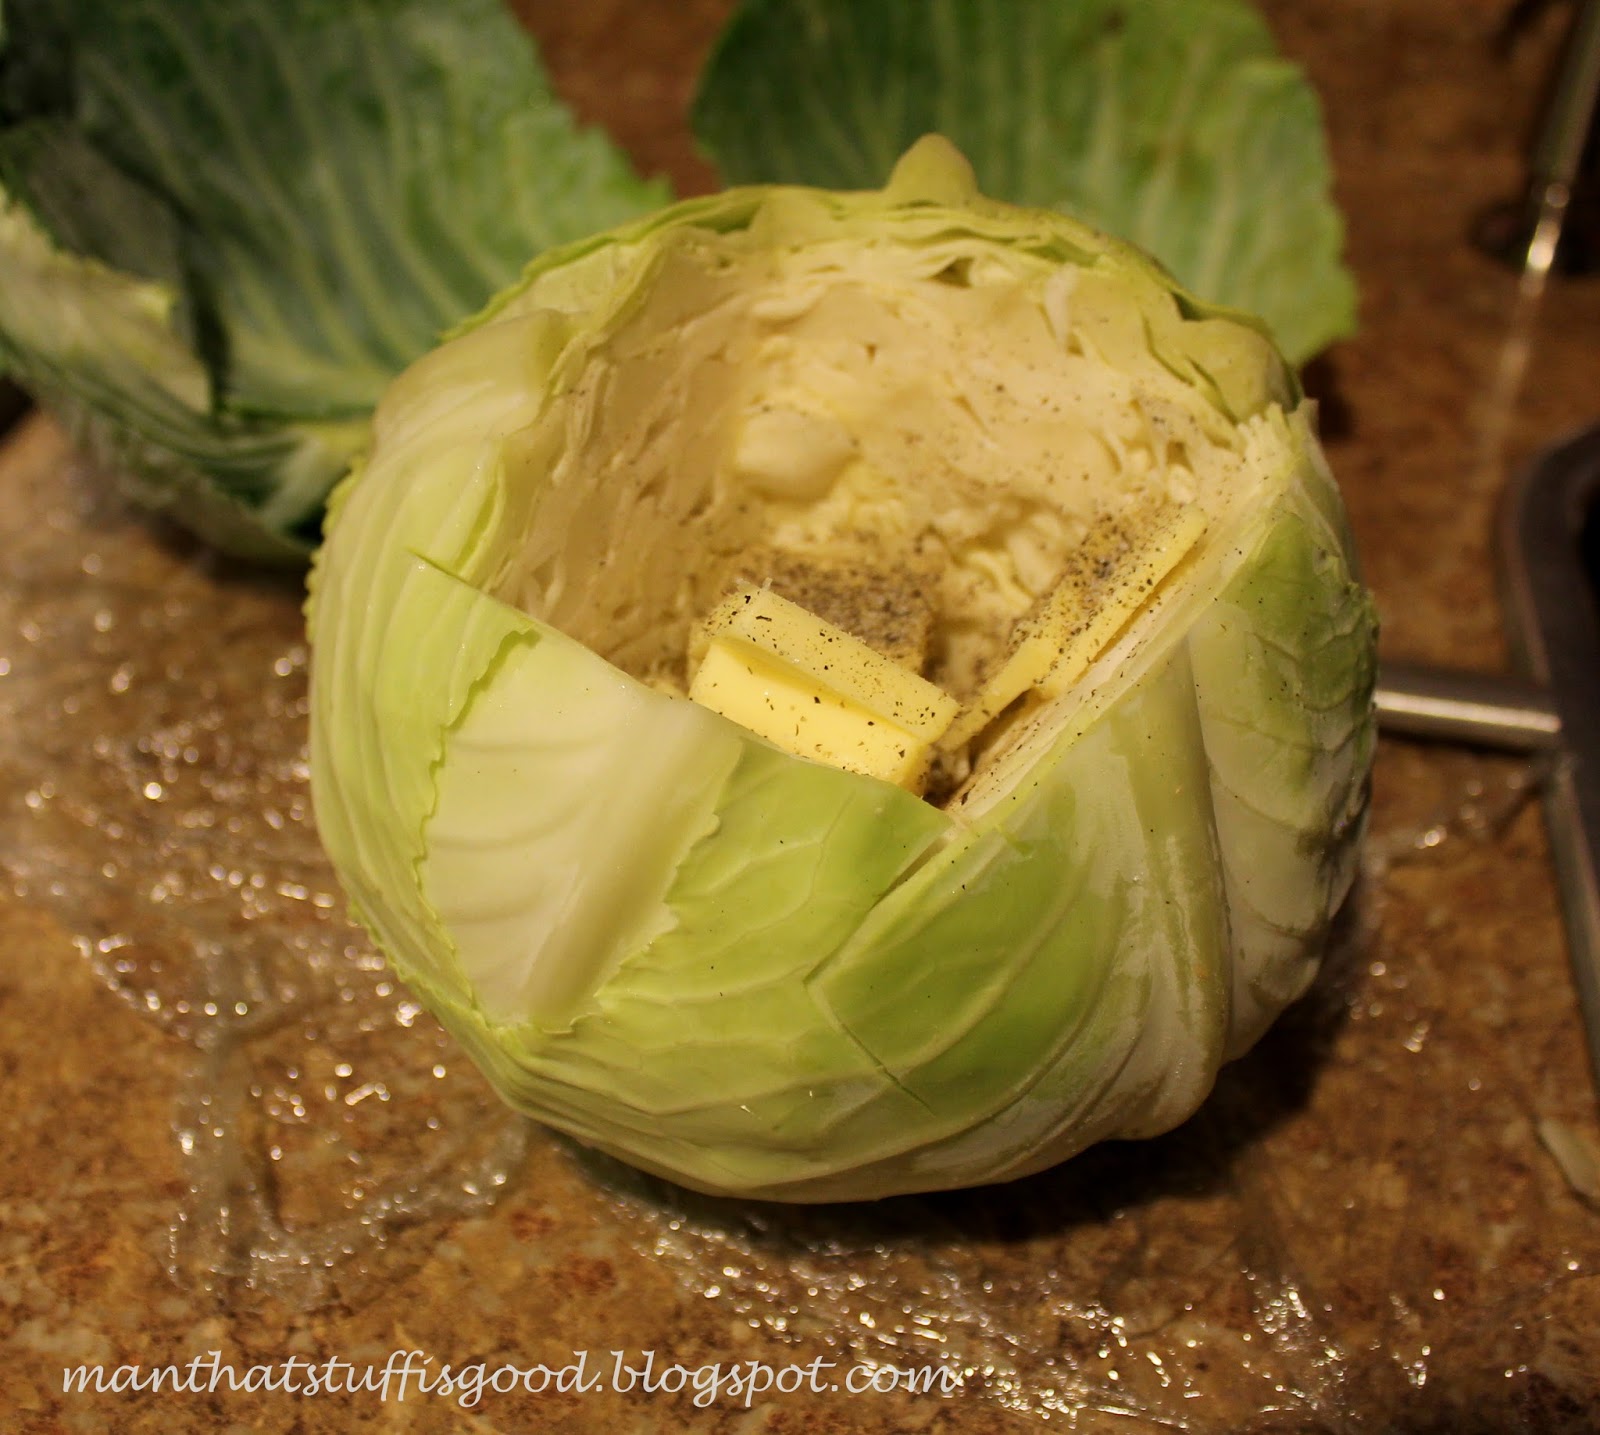 Man That Stuff Is Good!: Grilled Stuffed Cabbage